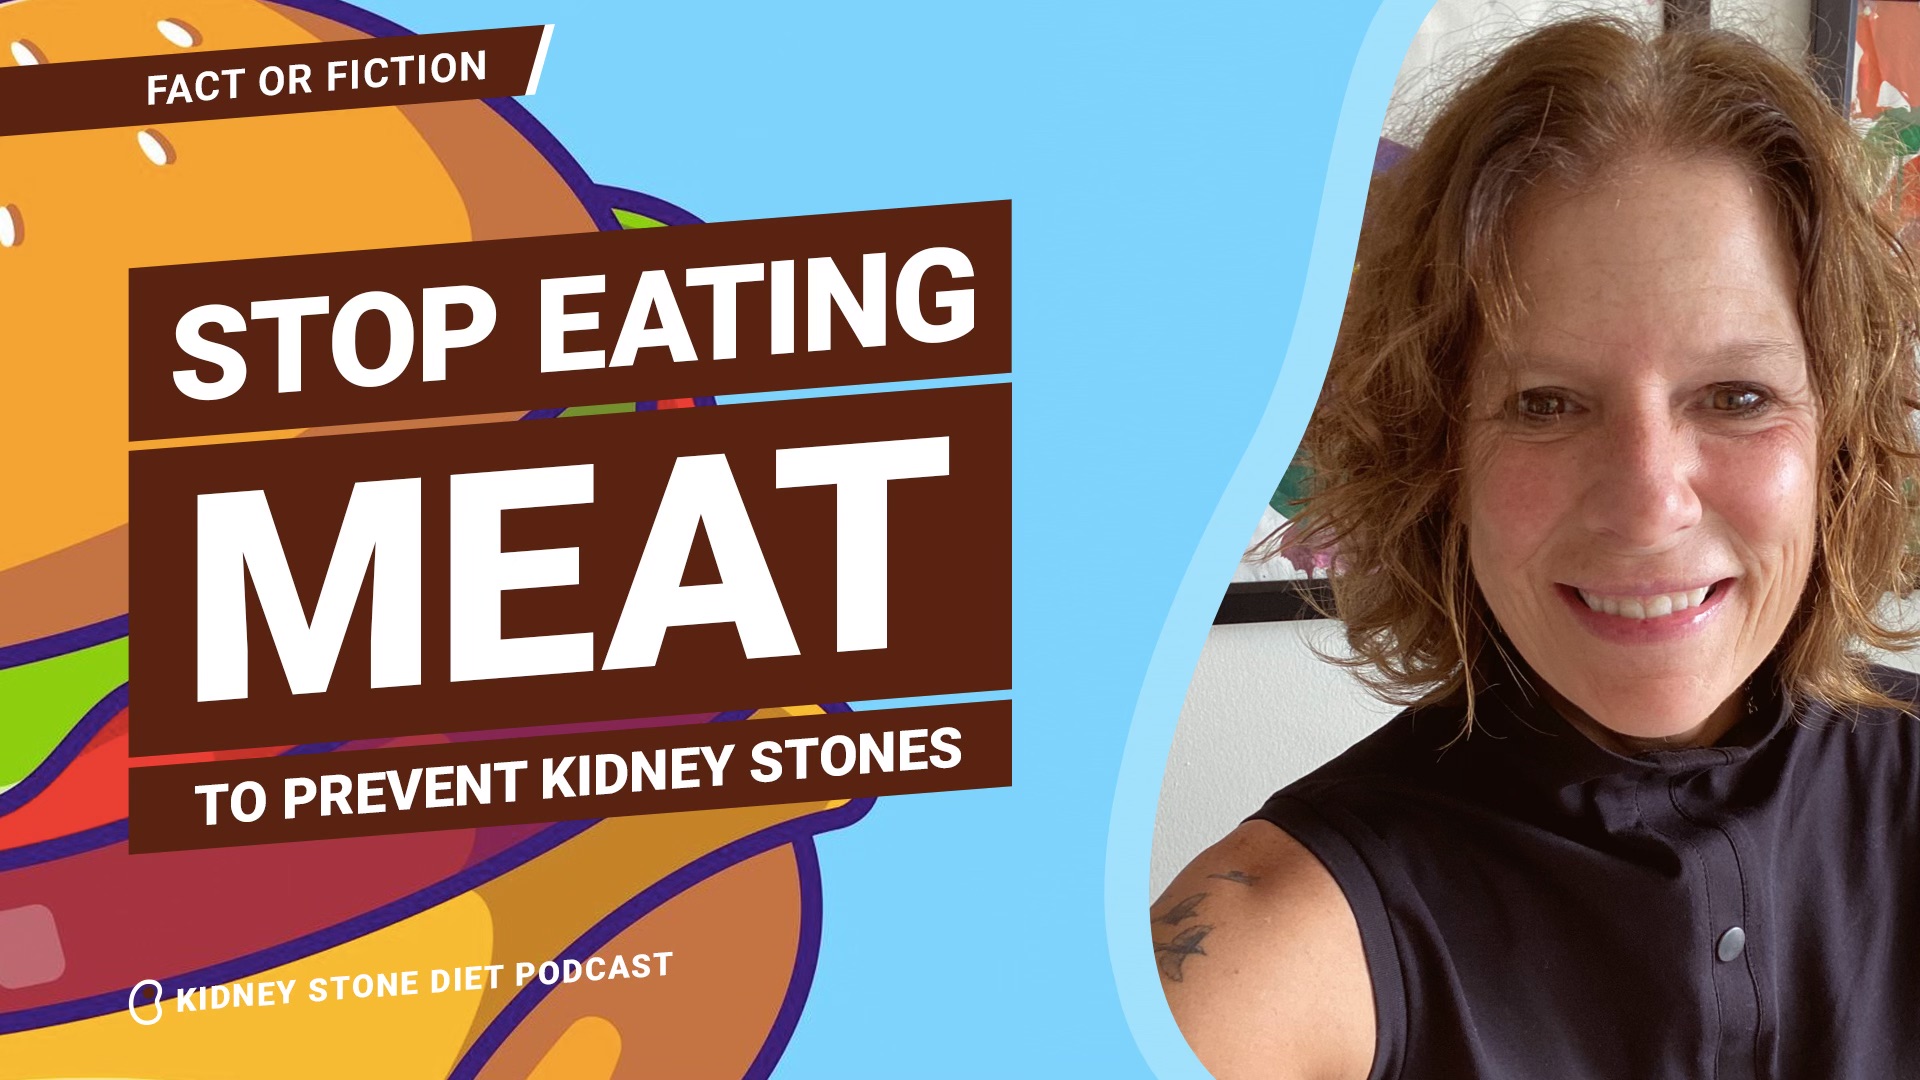 Fact or Fiction: Stop eating meat to prevent kidney stones